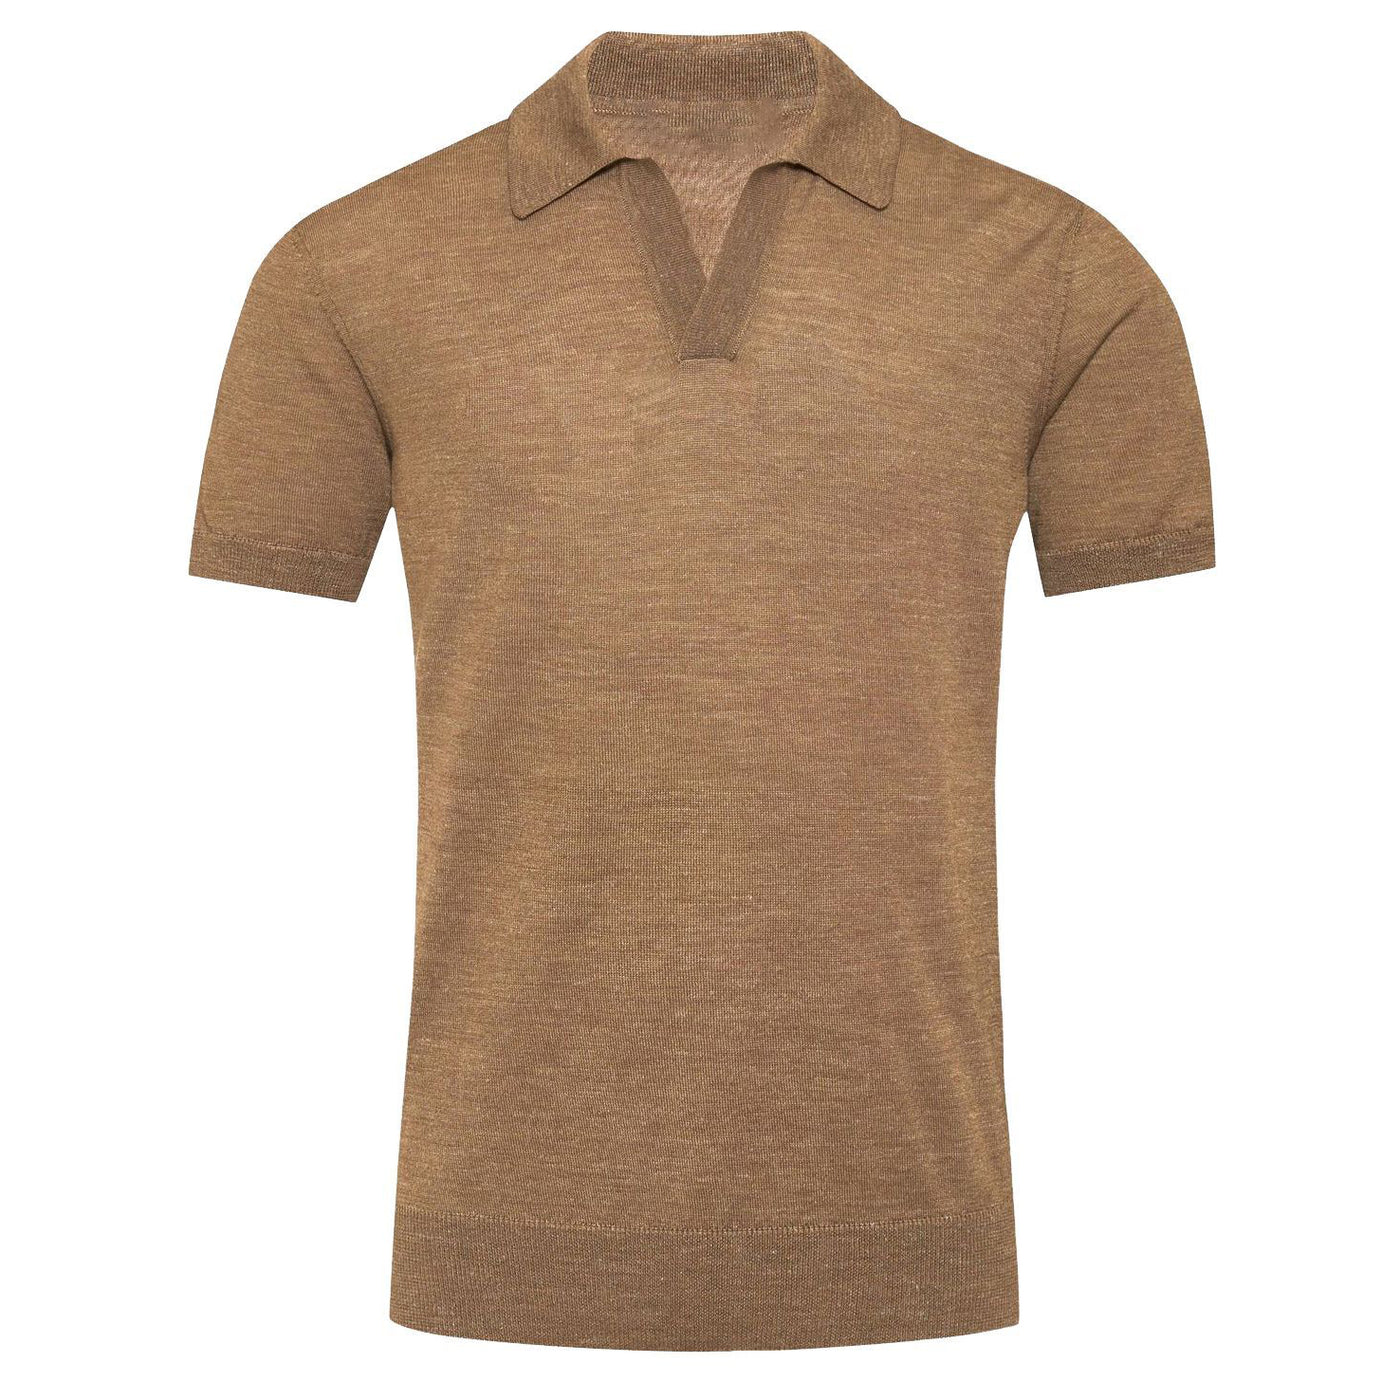 Men's Casual Retro Light Brown Solid Color Knitted Polo Shirt